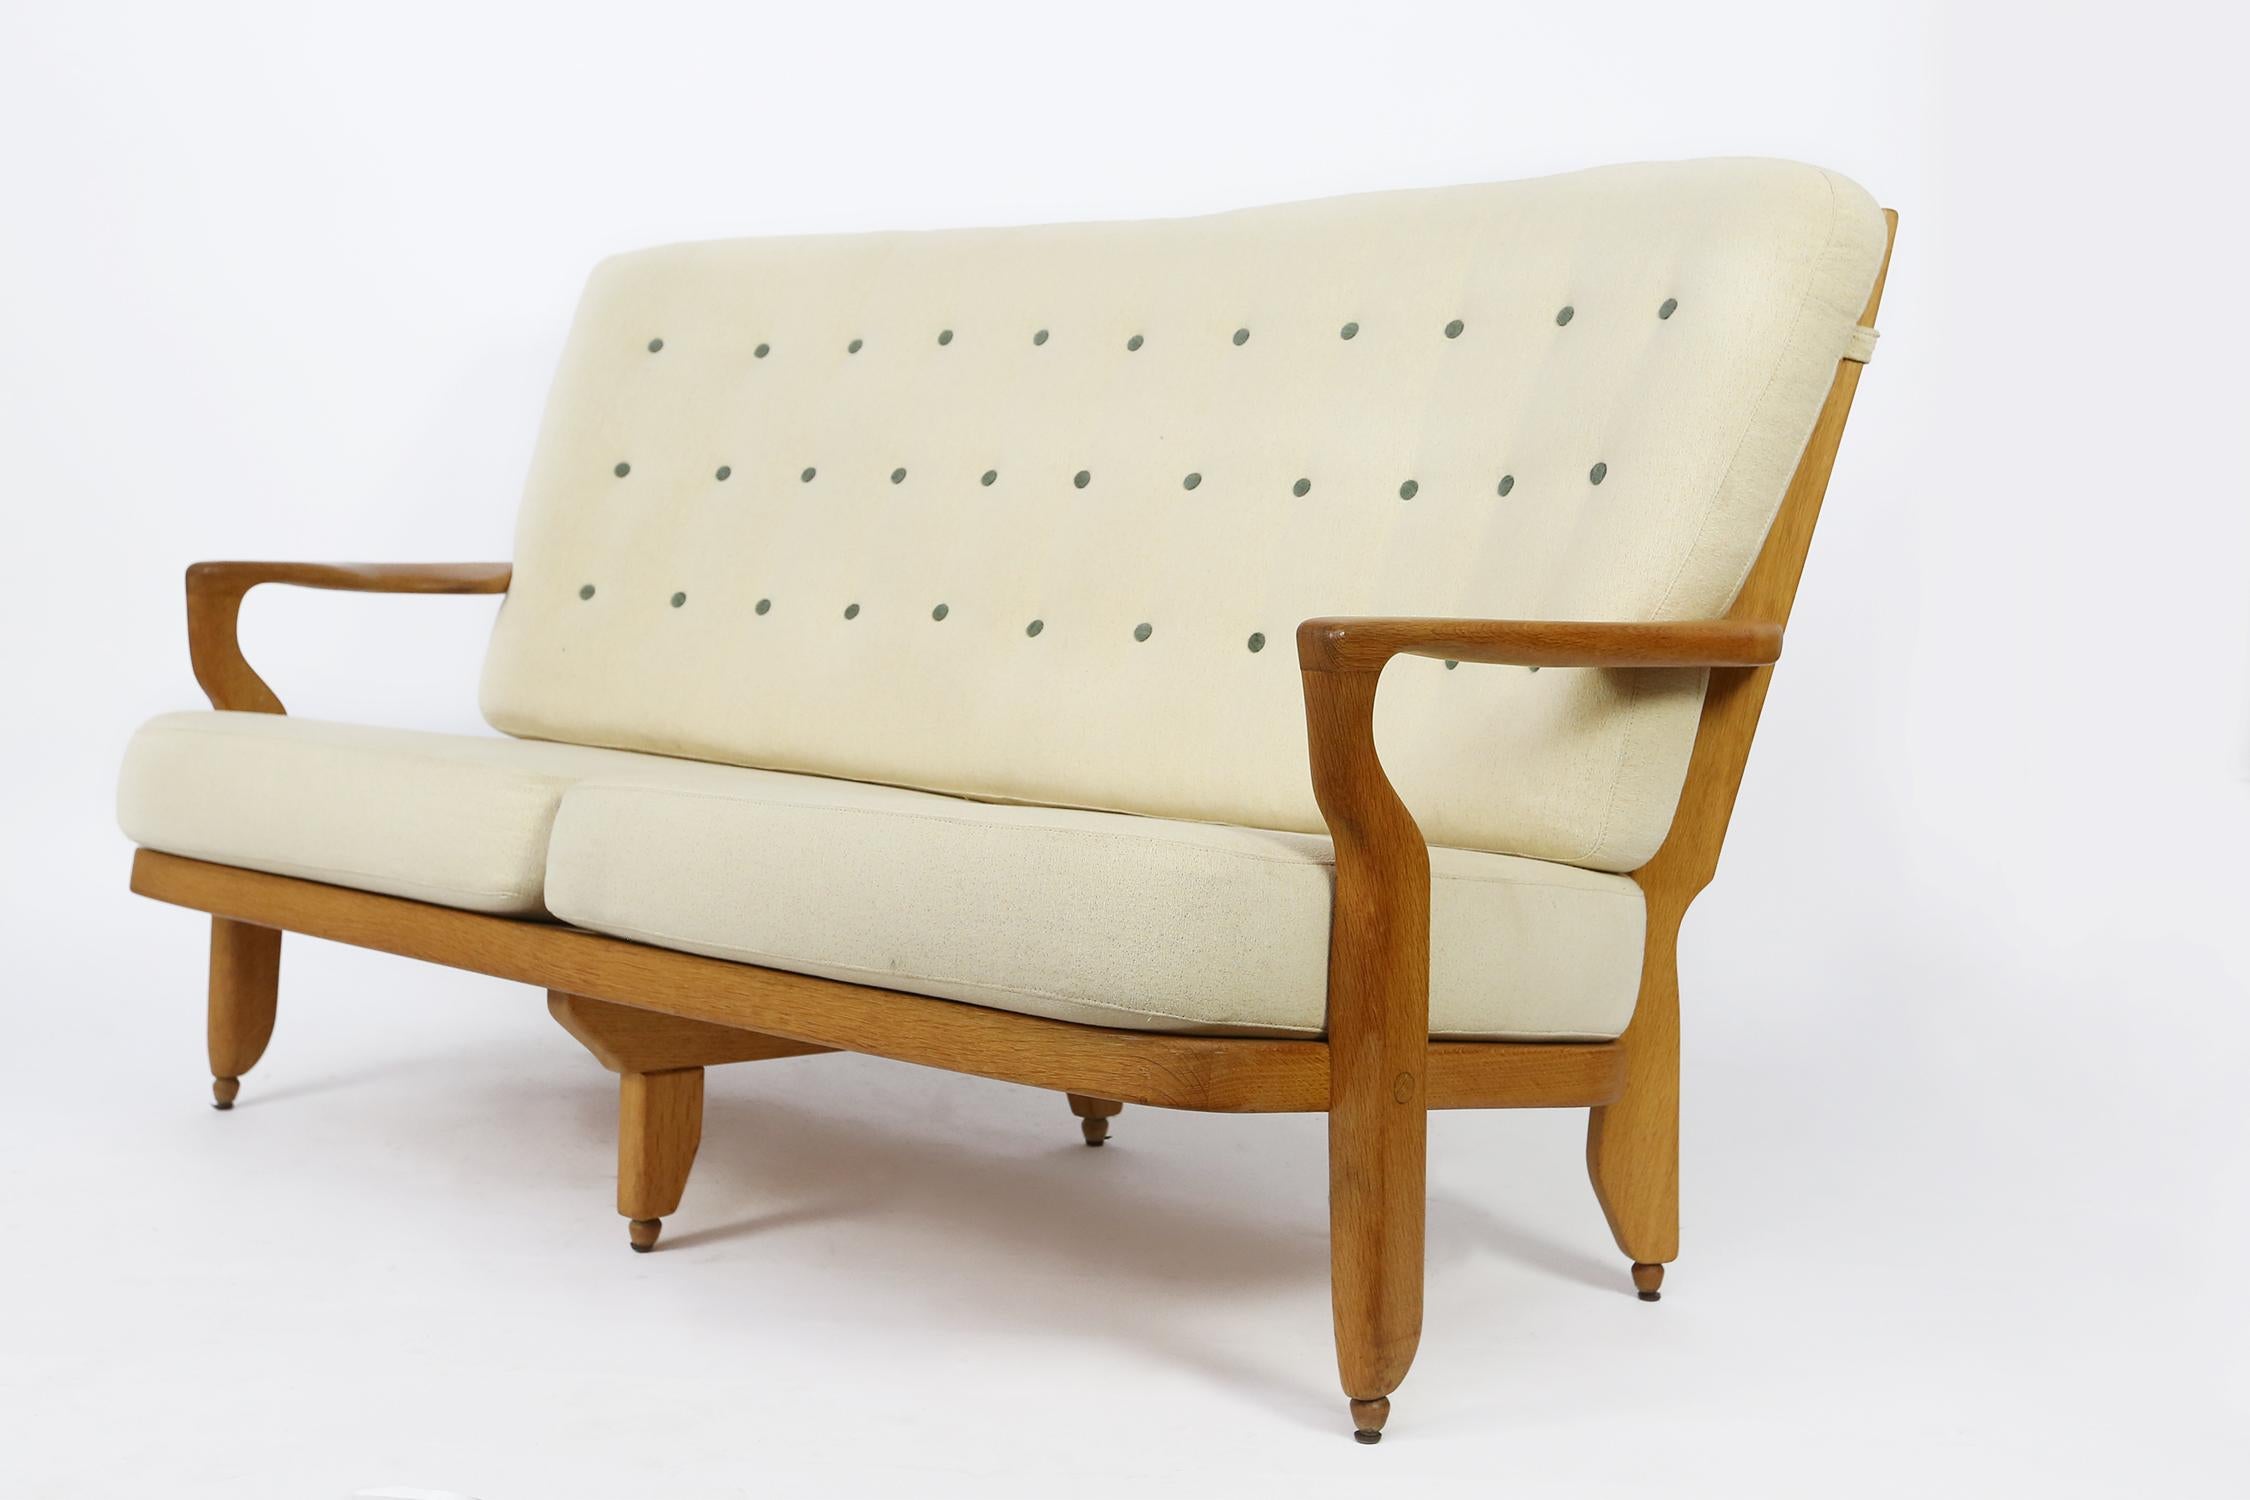 Sofa by French midcentury designers Robert Guillerme and Jacques Chambron, for Votre Maison 1960s in solid oak and with fabric cushions.
This Guillerme et Chambron sofa displays a beautiful contrast between the light wooden oak frame and the